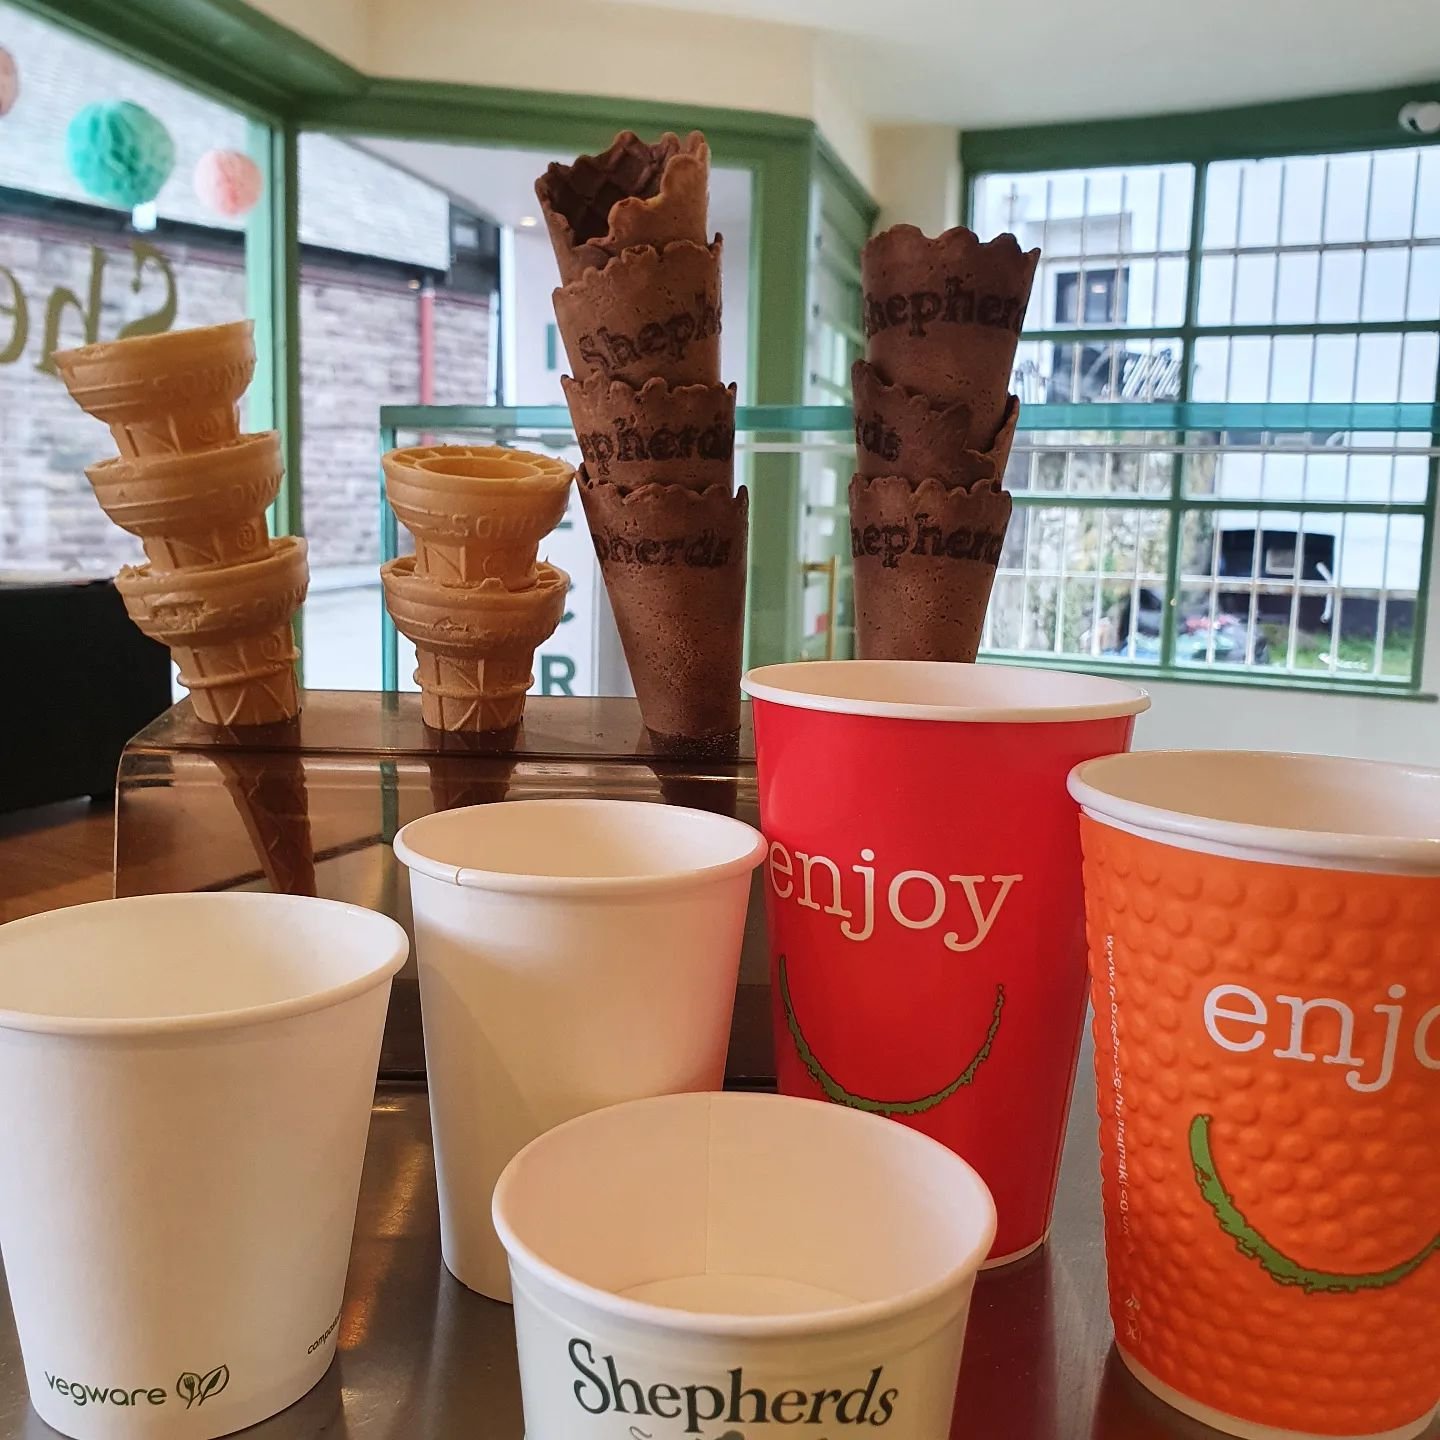 Did you know you get 15p off your drink if you bring your own cup to our Abergavenny shop?

Warning - this is a slightly long post about packaging...

Takeaway packaging feels like a bit of a dirty secret, compostable and recyclable cups aren't actua